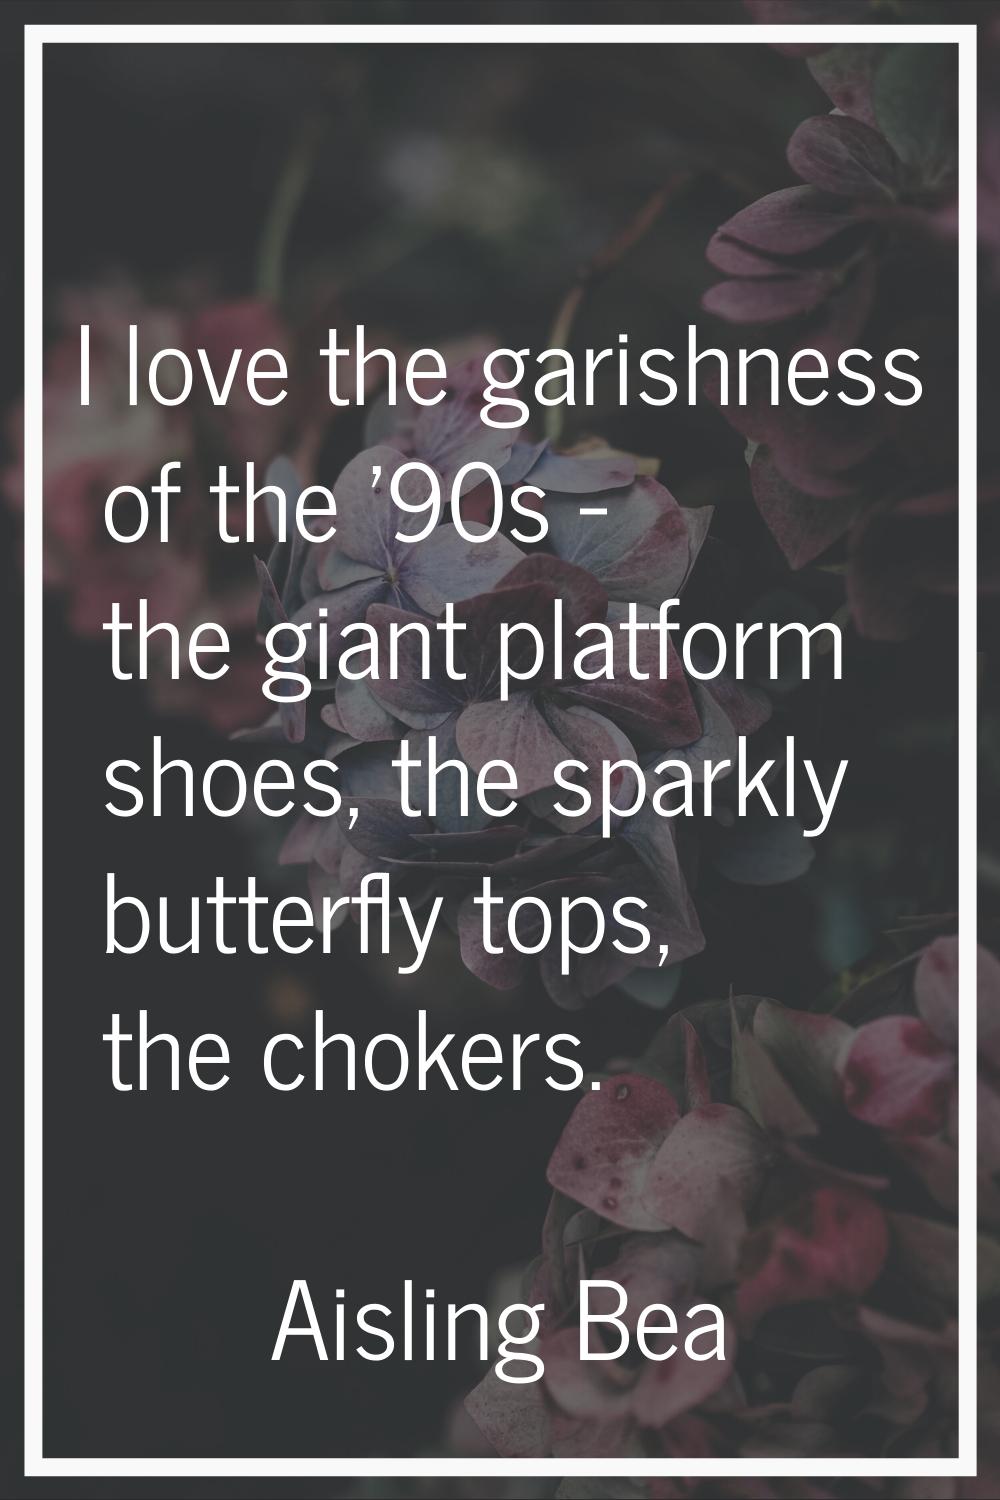 I love the garishness of the '90s - the giant platform shoes, the sparkly butterfly tops, the choke